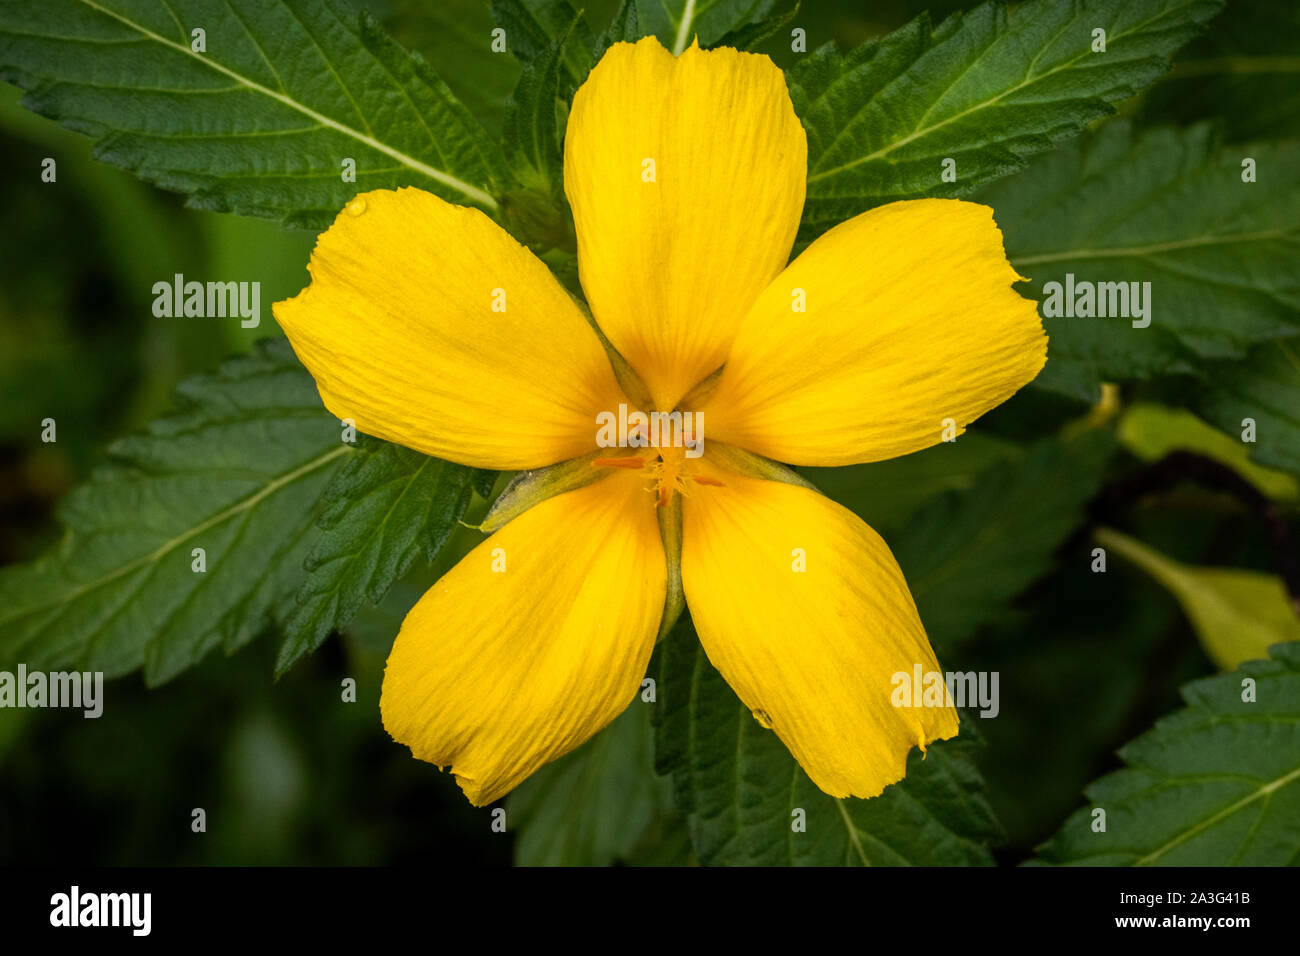 Yellow, Damiana flower, on green leaves, Stock Photo